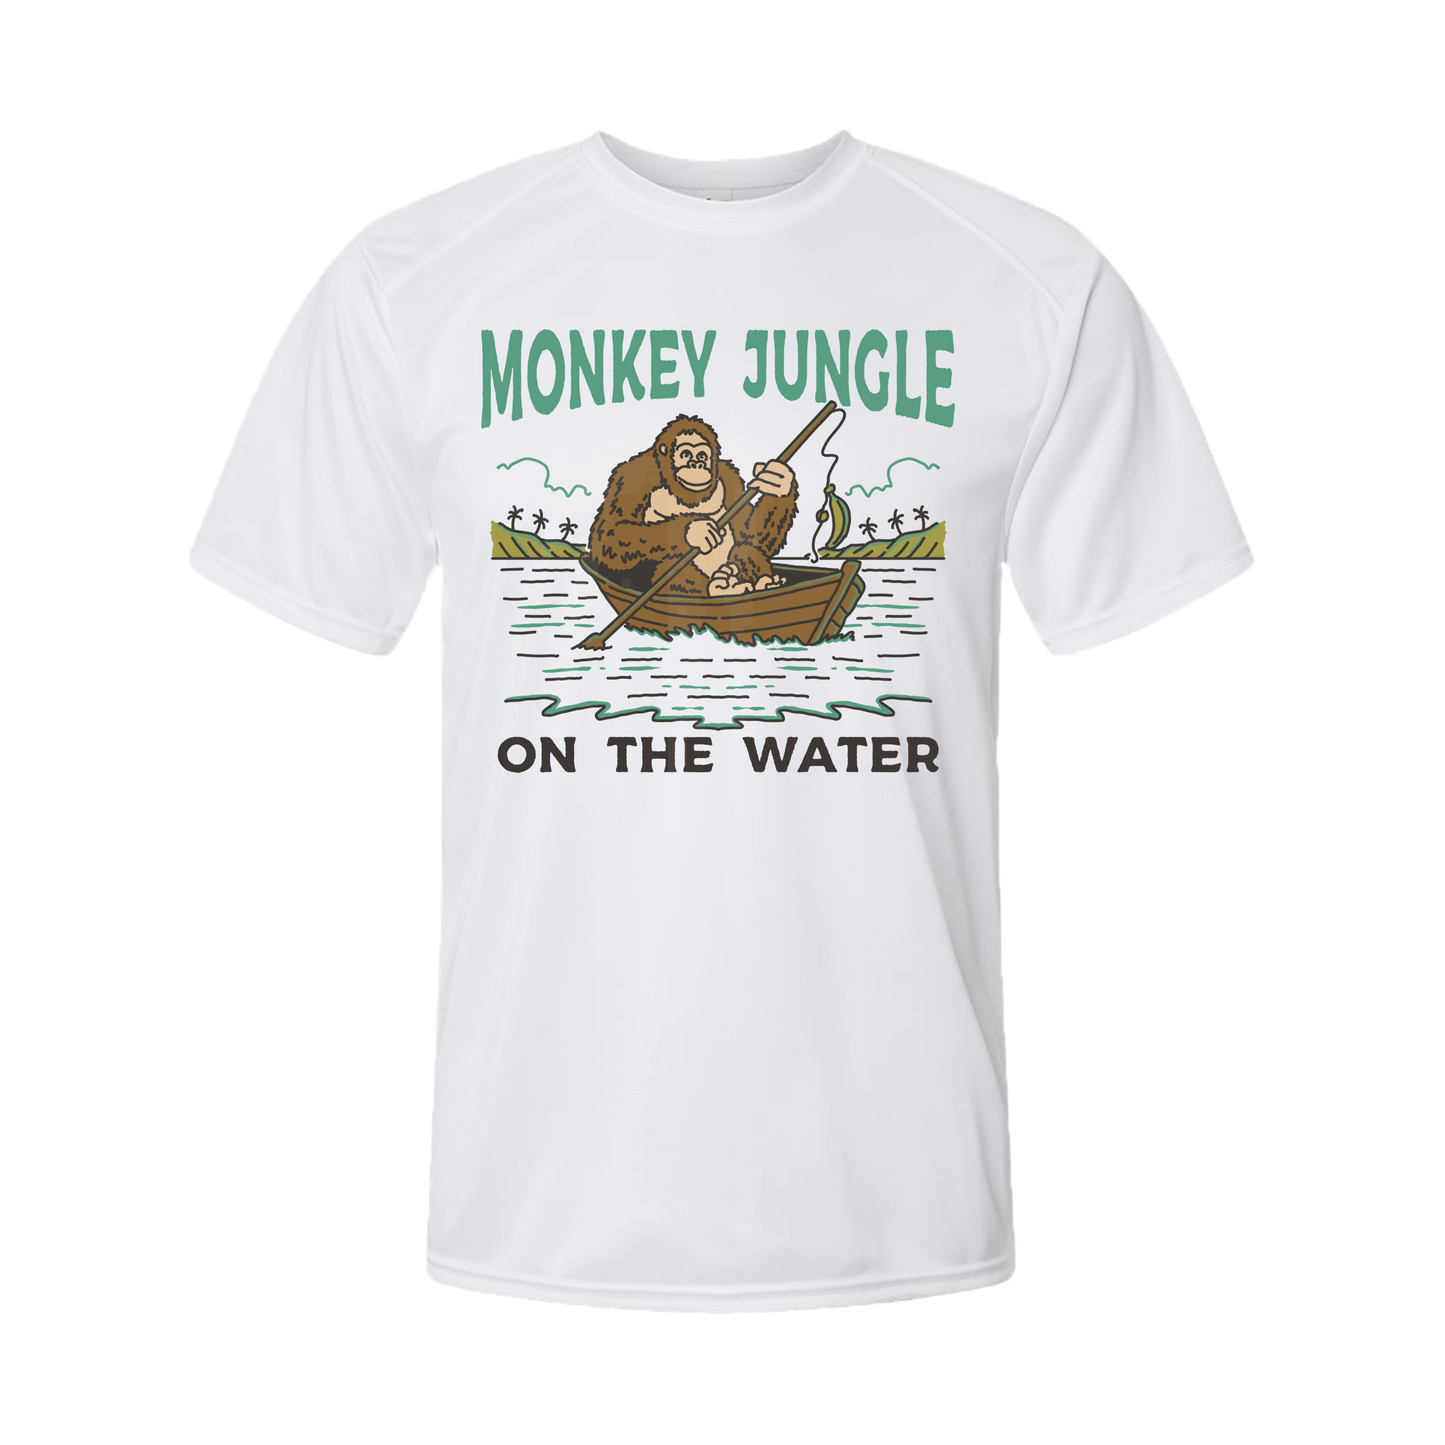 "On the Water" Performance T-shirt